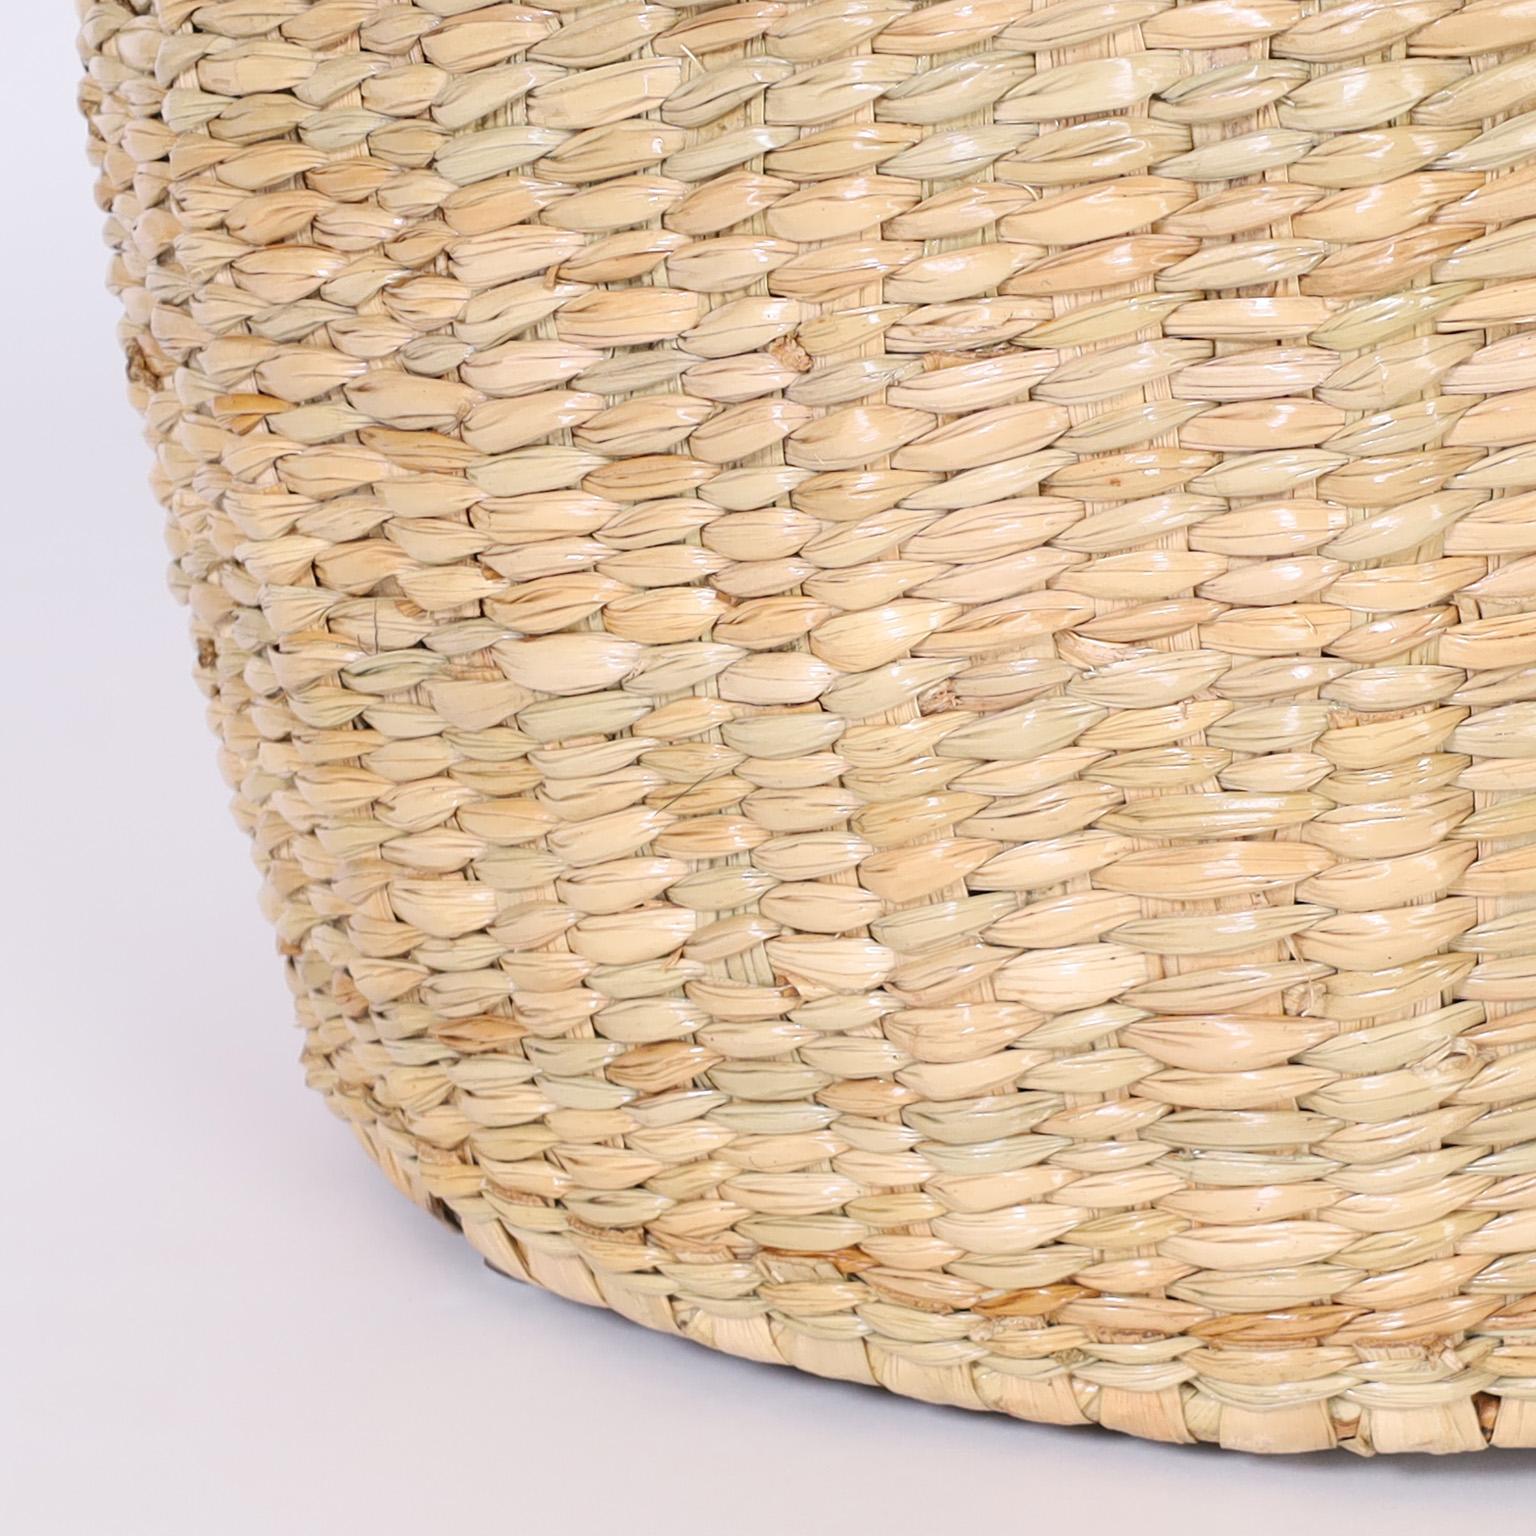 Contemporary Pair of Wicker Chuspata Garden Seats from the FS Flores Collection